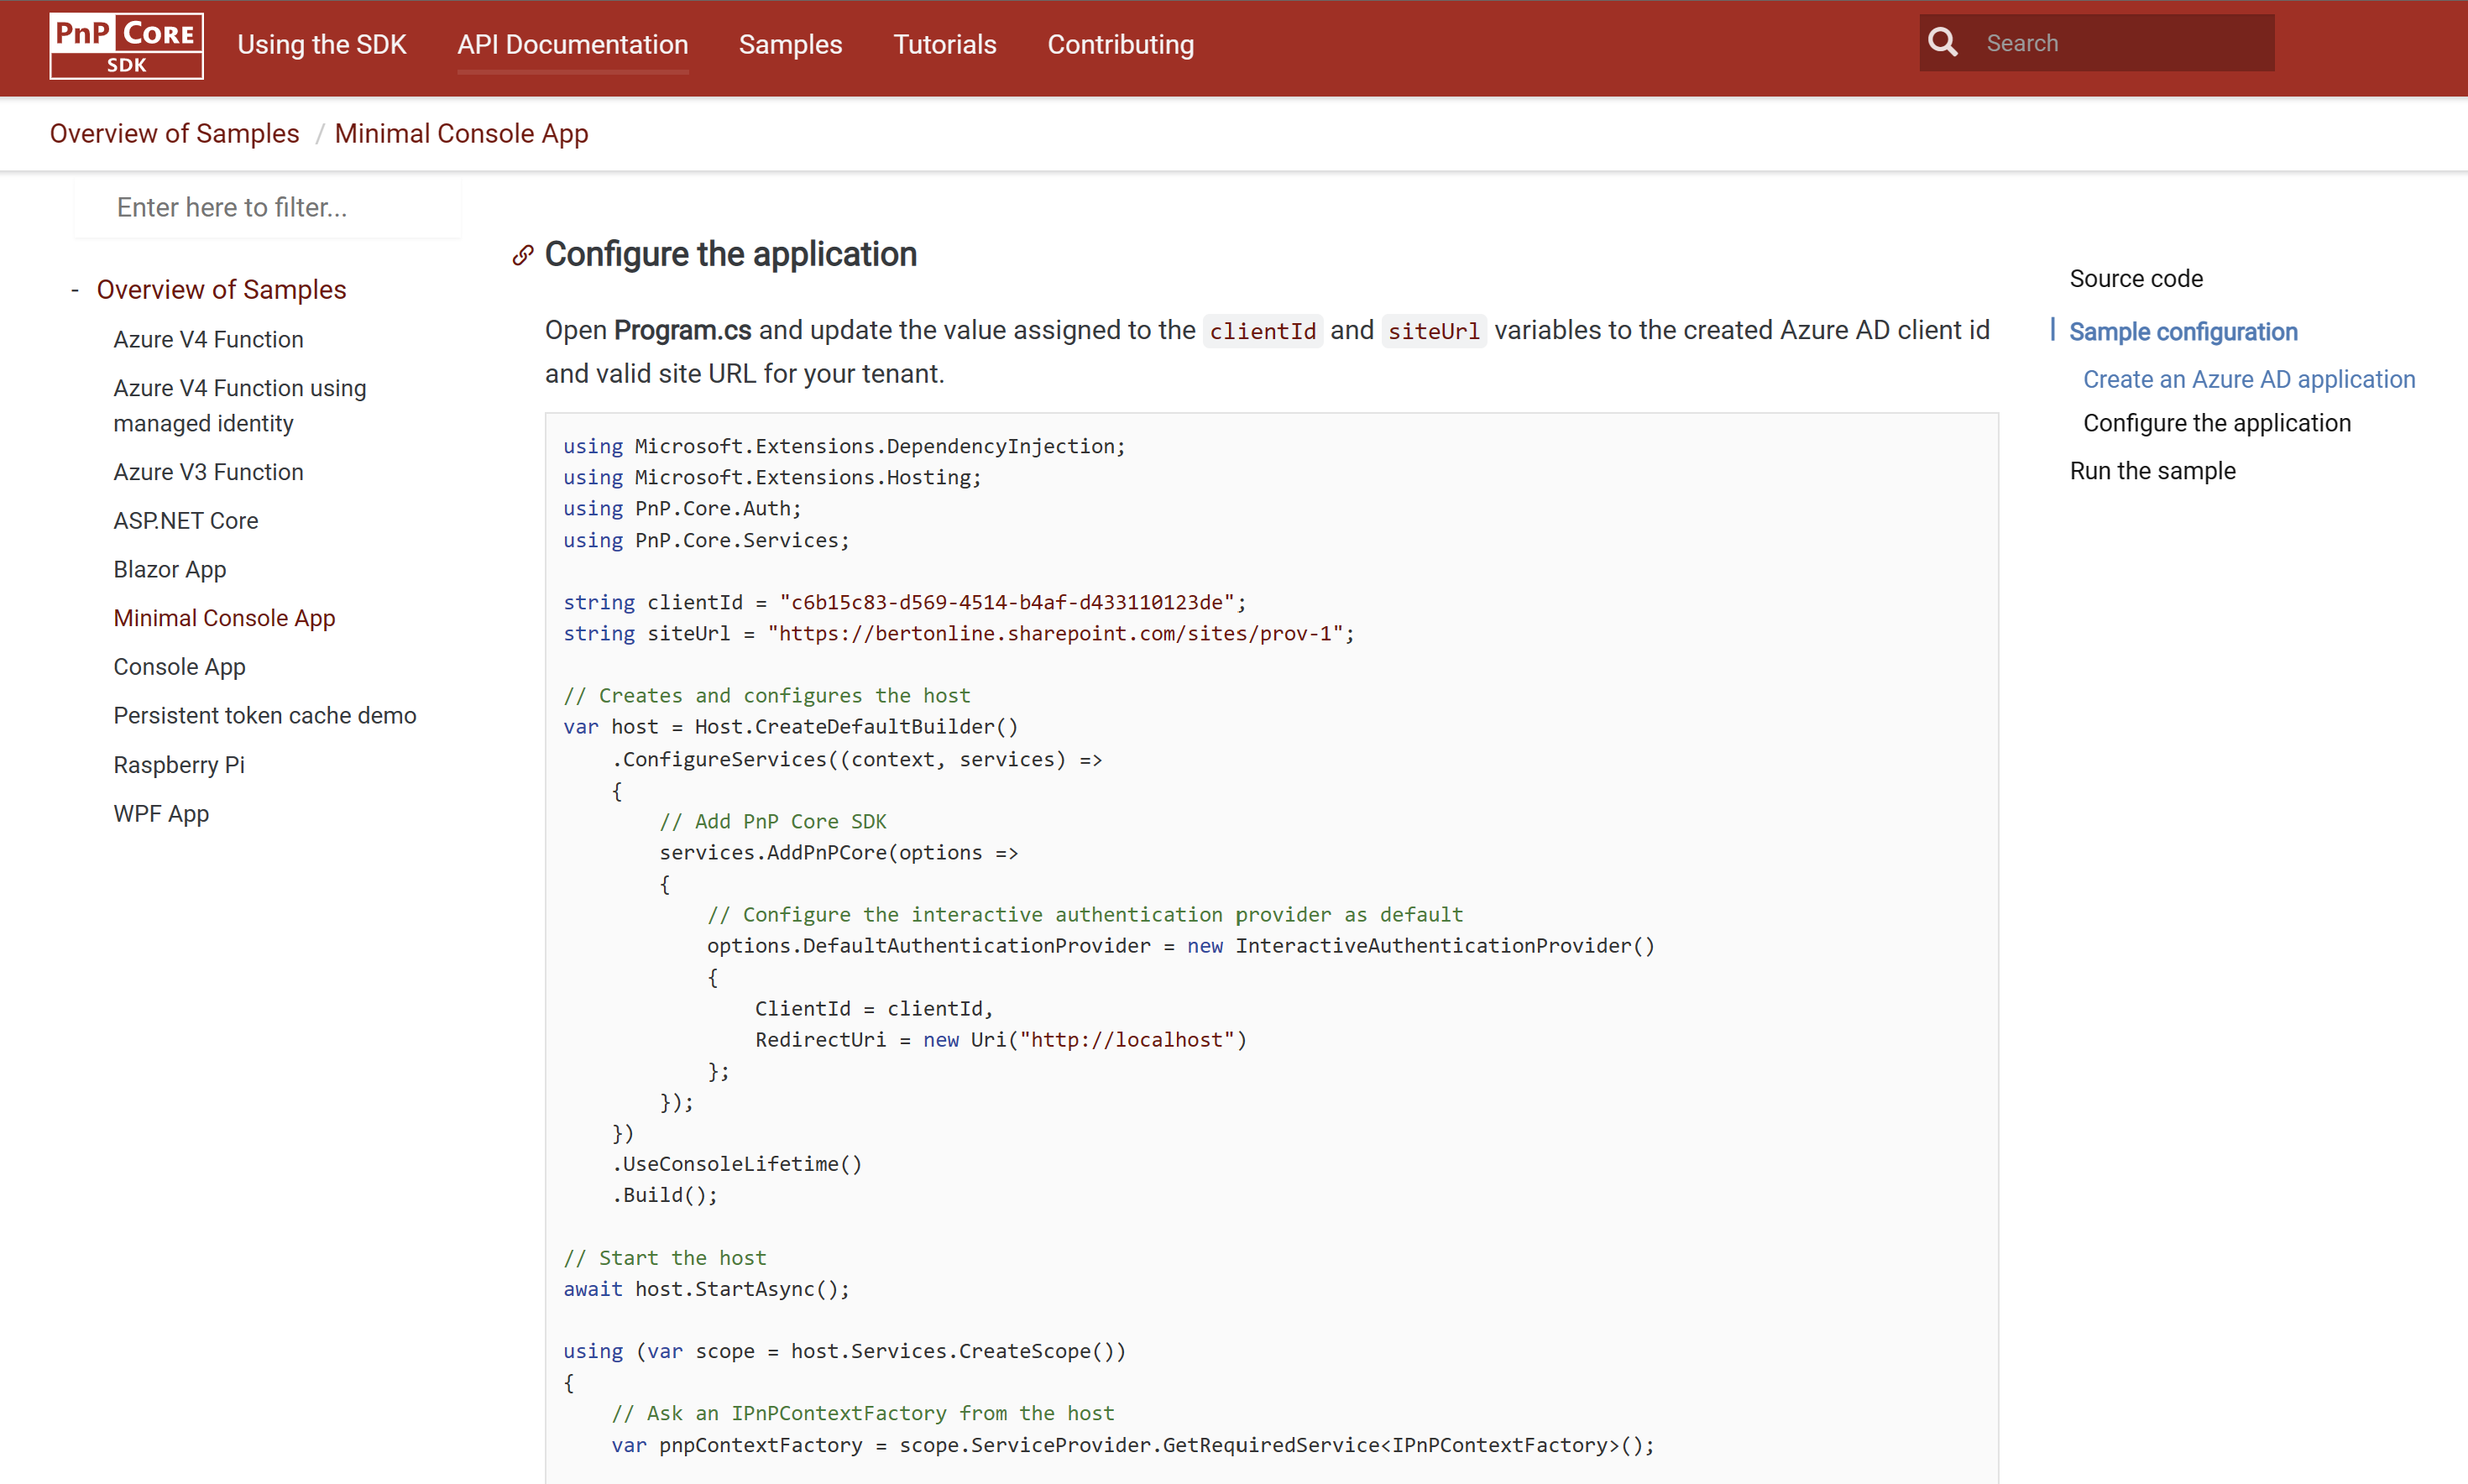 Showing the PnP Core SDK Site with code fragments that are candidates for PolyGlots